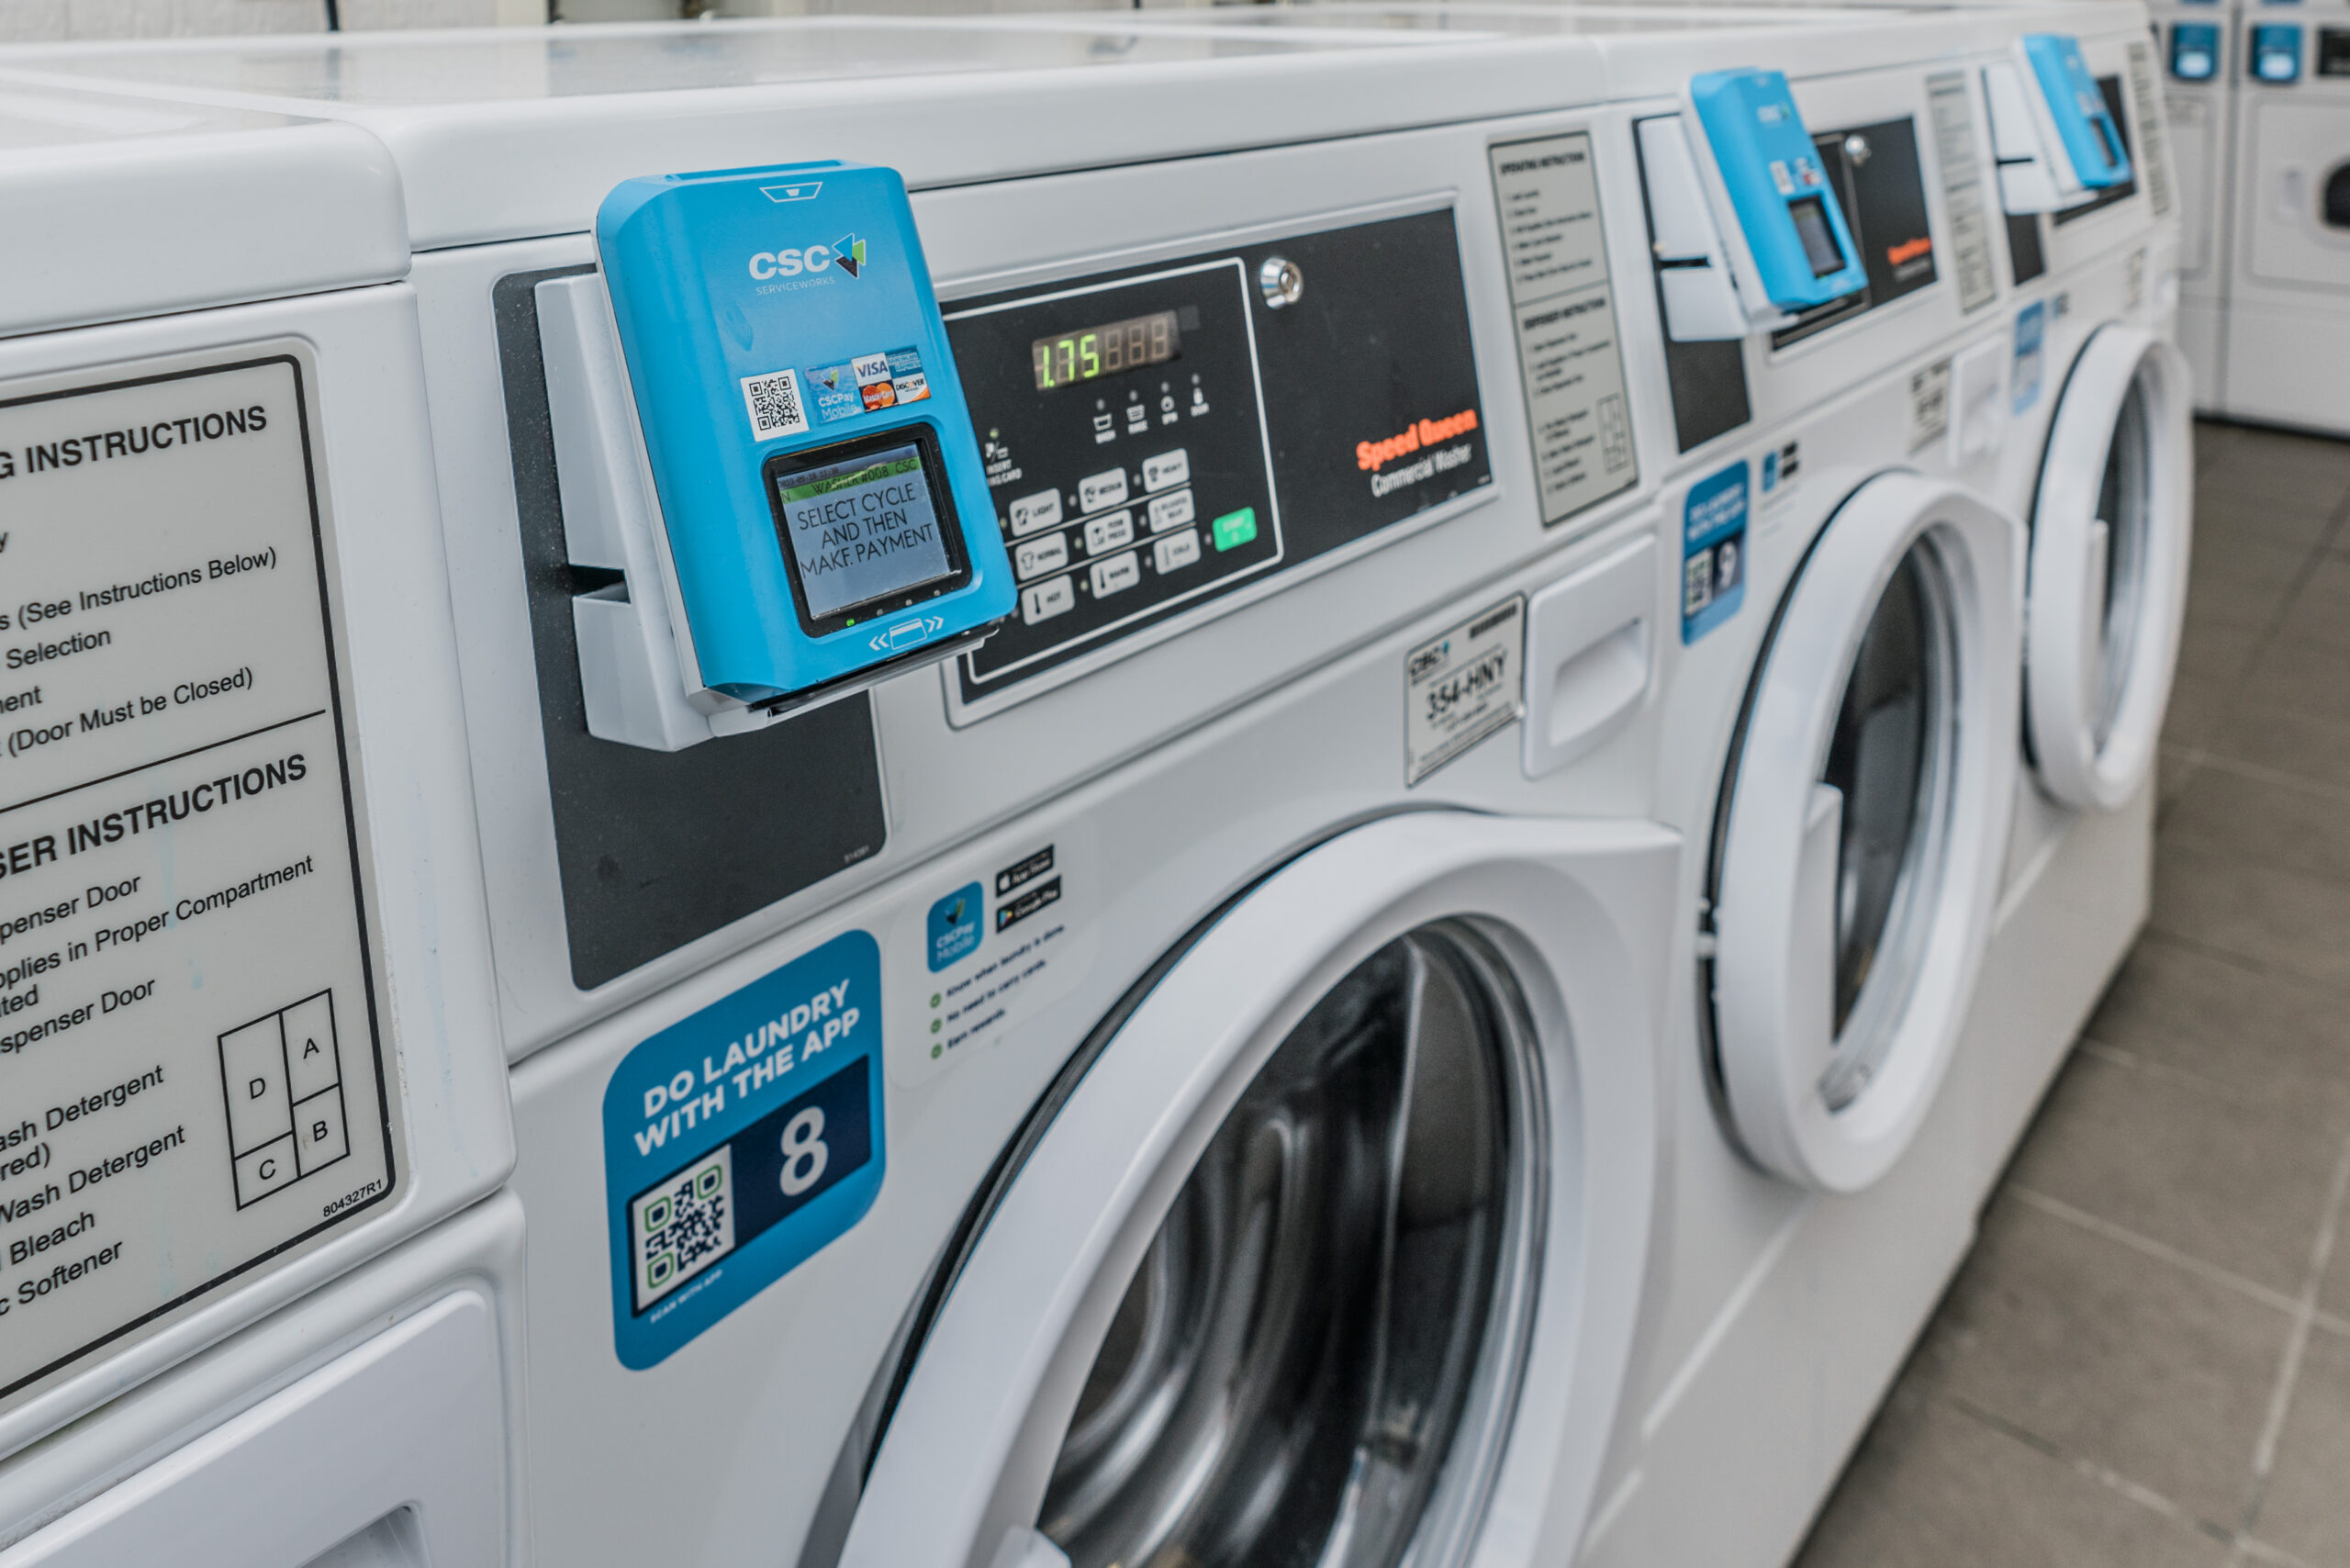 Two students uncovered a flaw that allows to use laundry machines for free